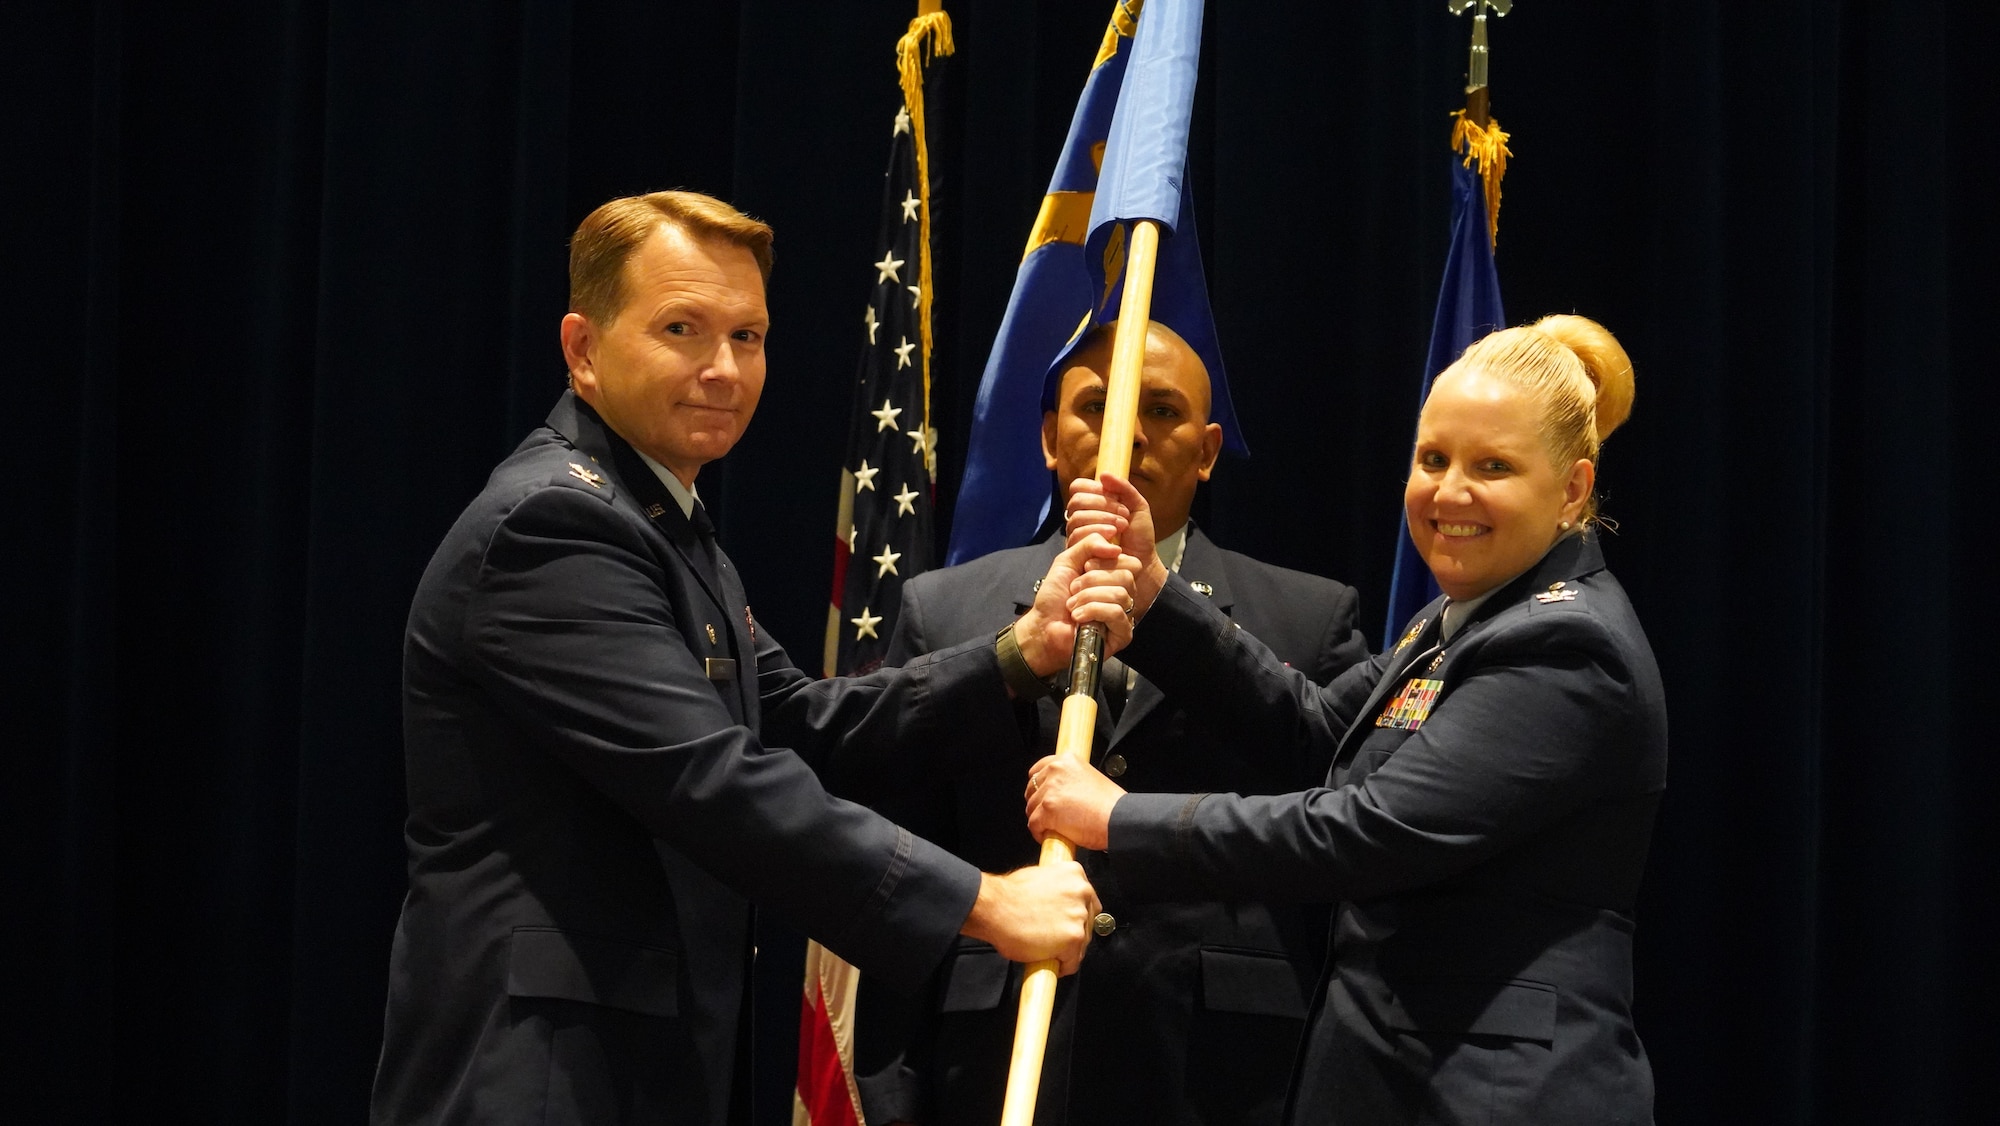 Col. Catherine Callender accepts the 88th Operational Medical Readiness Squadron guidon from Col. Dale Harrell, 88th Medical Group commander, during a change of command ceremony July 28 in the Wright-Patterson Medical Center auditorium.